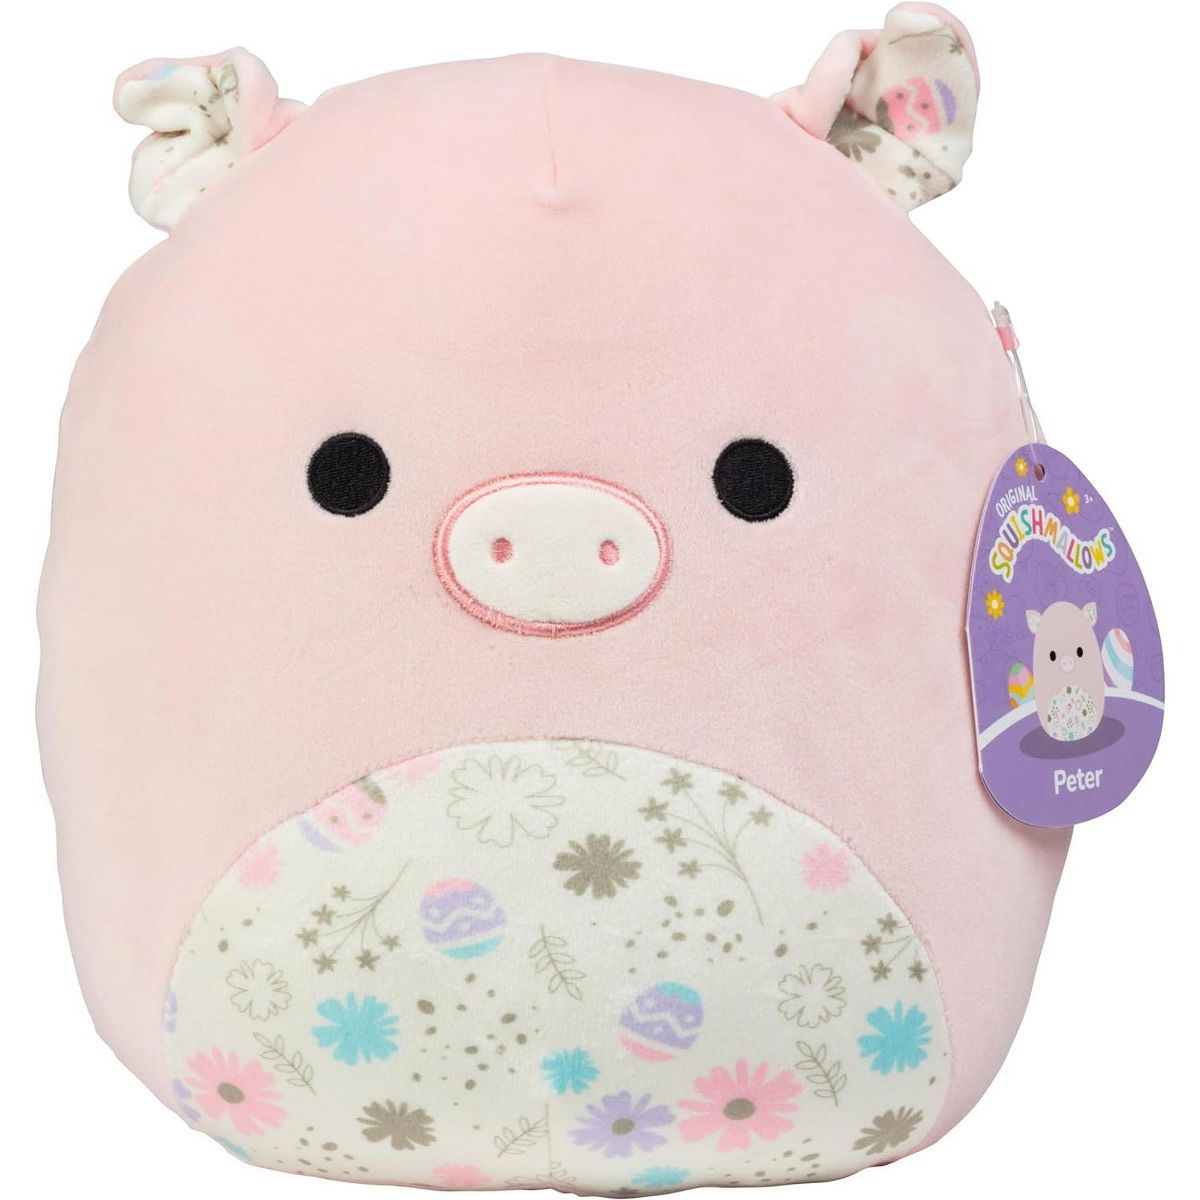 Squishmallows 10" Peter The Pig Plush - Officially Licensed Kellytoy - Soft & Squishy Stuffed Ani... | Target